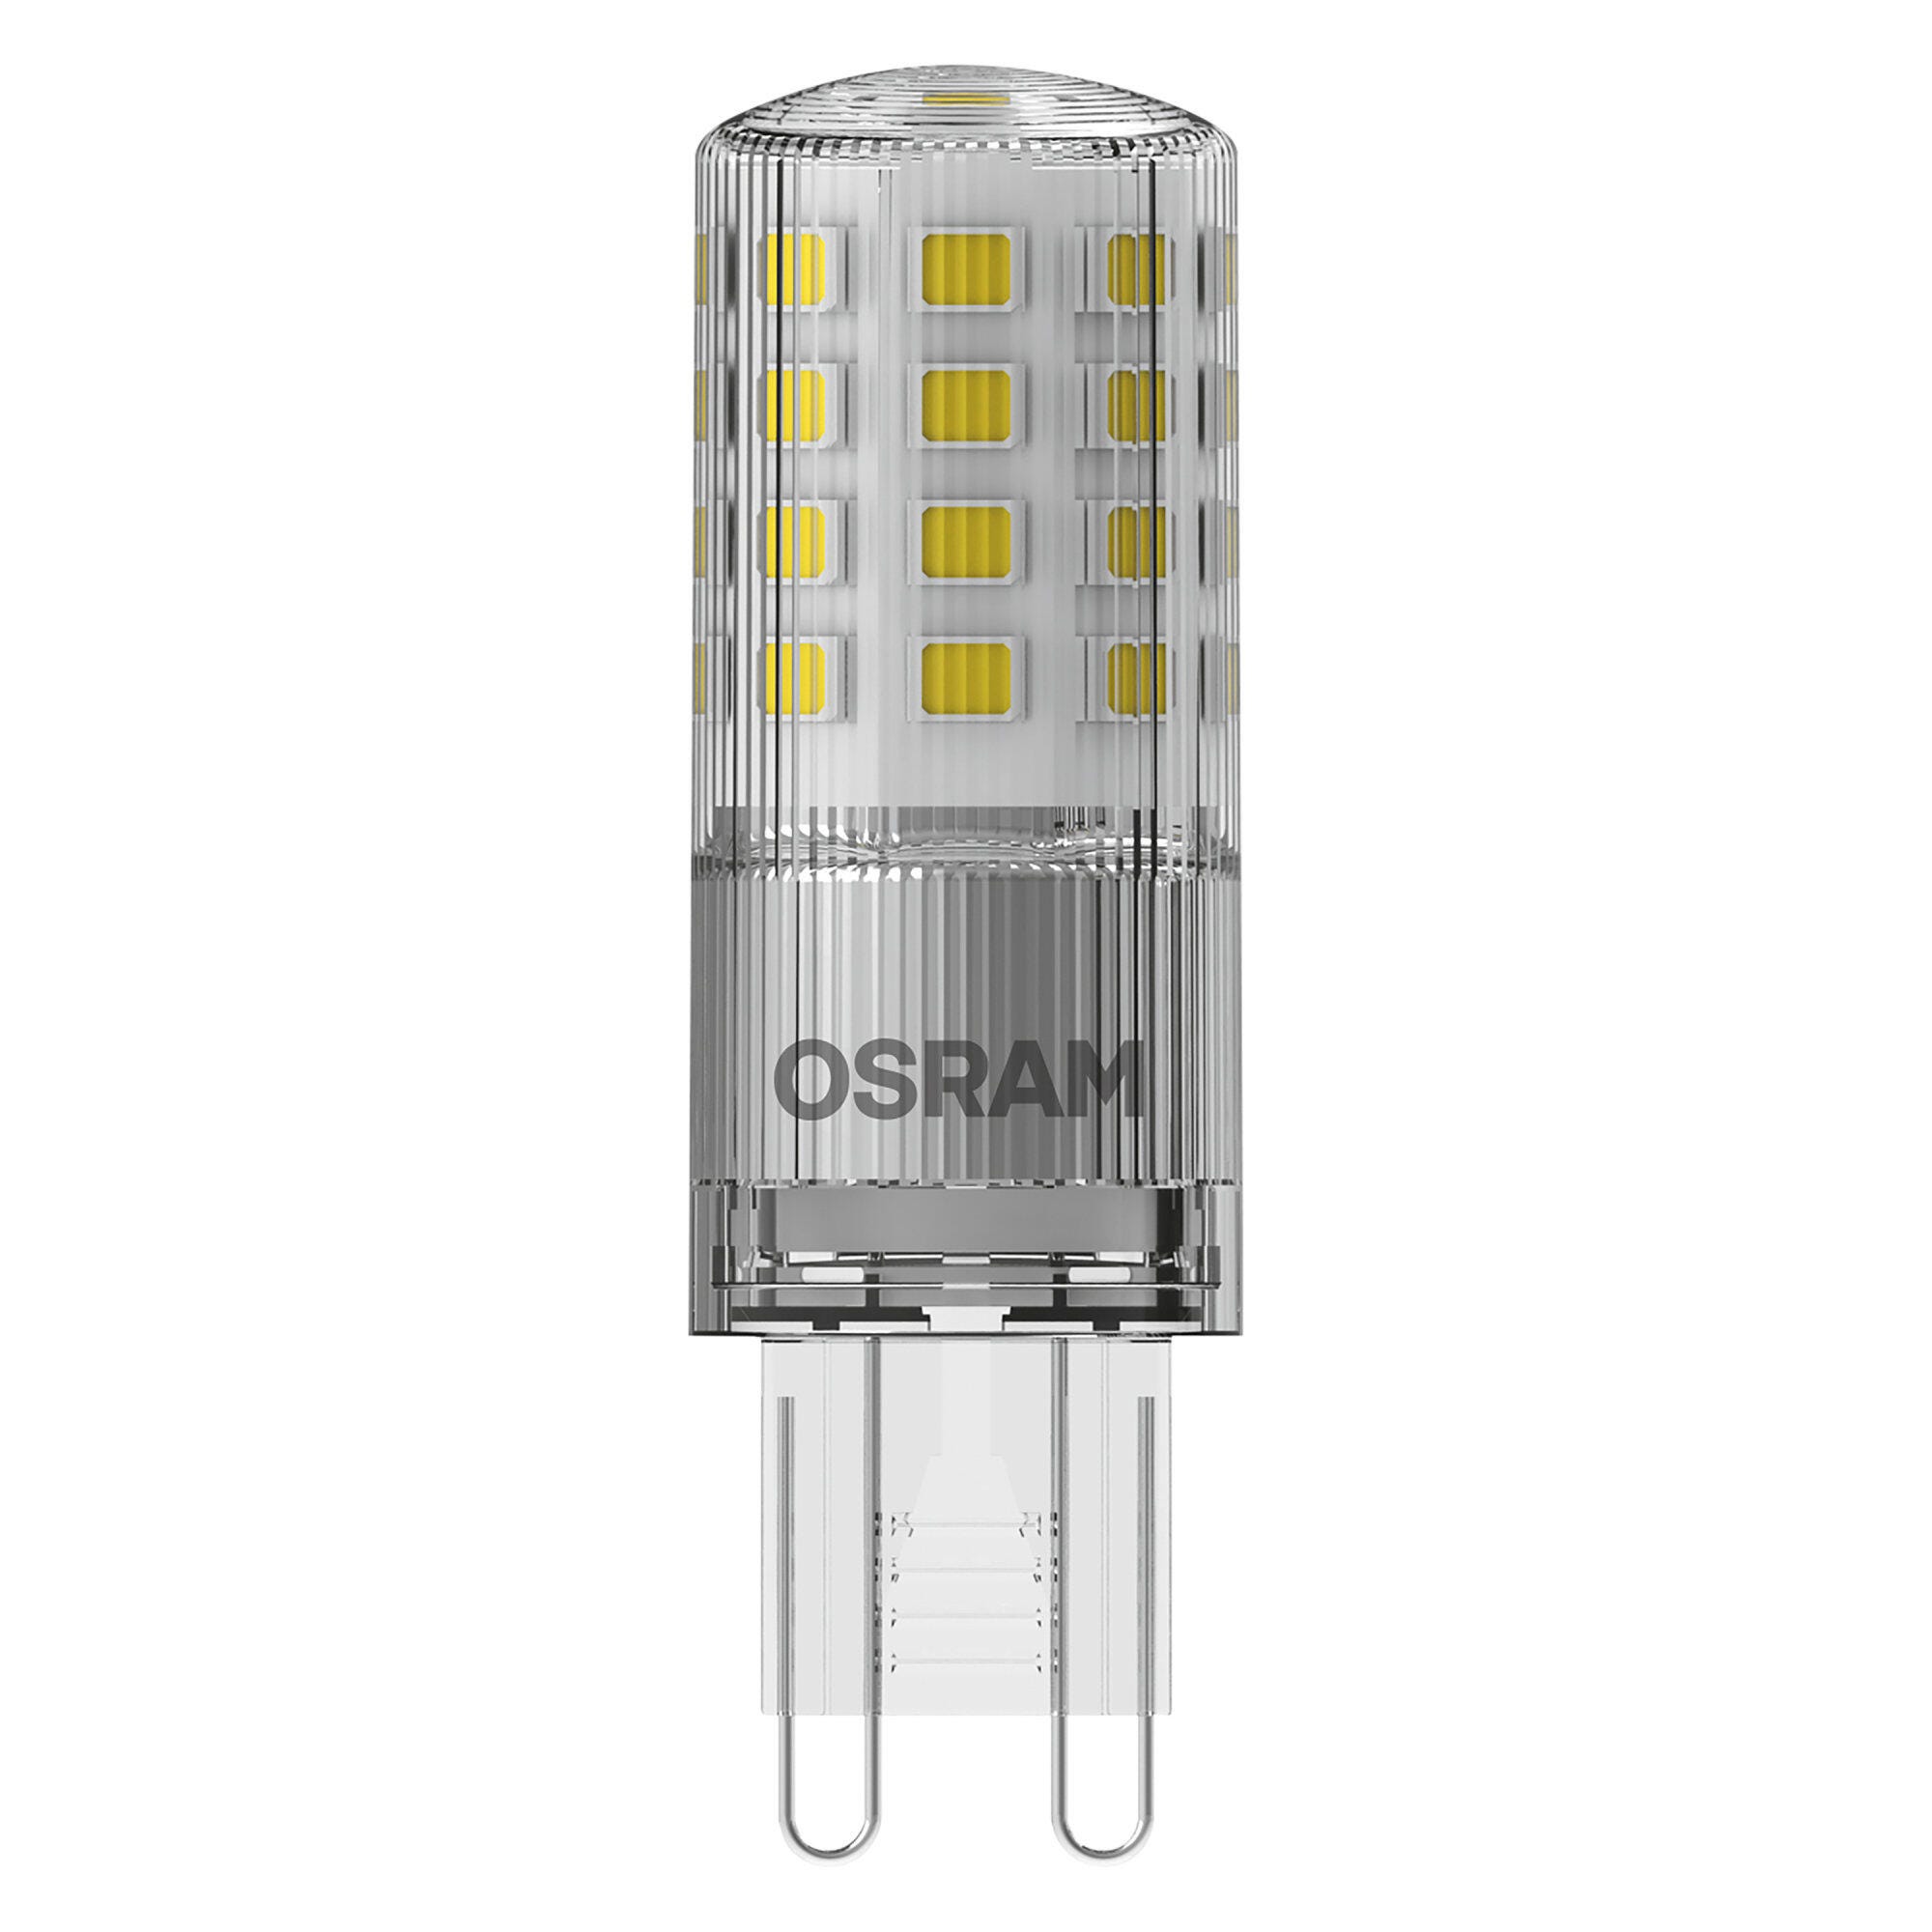 Ampoule led, capsule G9, 470lm = 40W, blanc chaud, dimmable, OSRAM